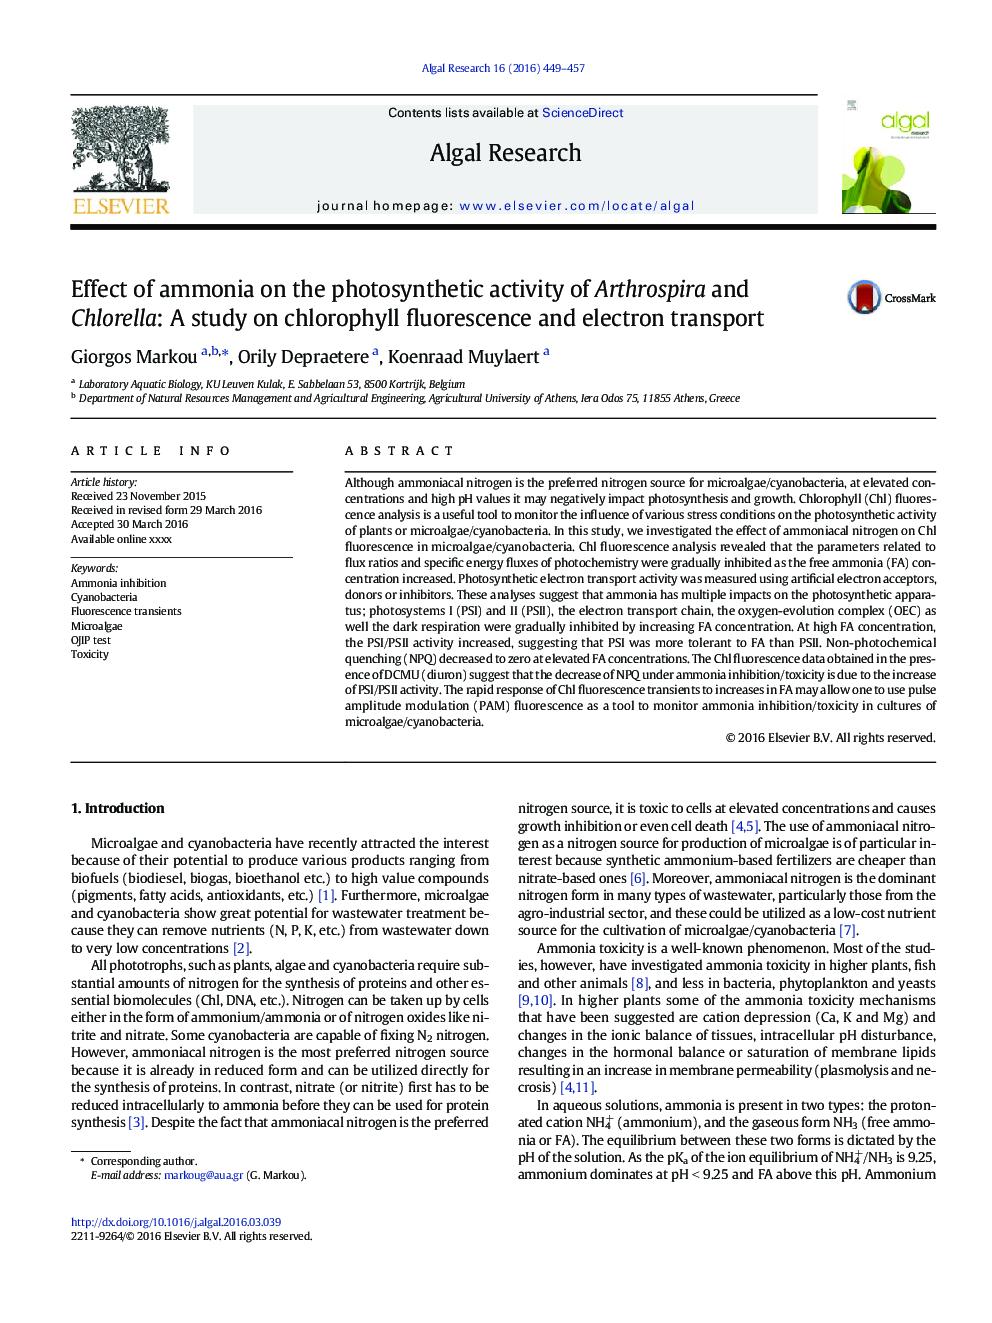 Effect of ammonia on the photosynthetic activity of Arthrospira and Chlorella: A study on chlorophyll fluorescence and electron transport